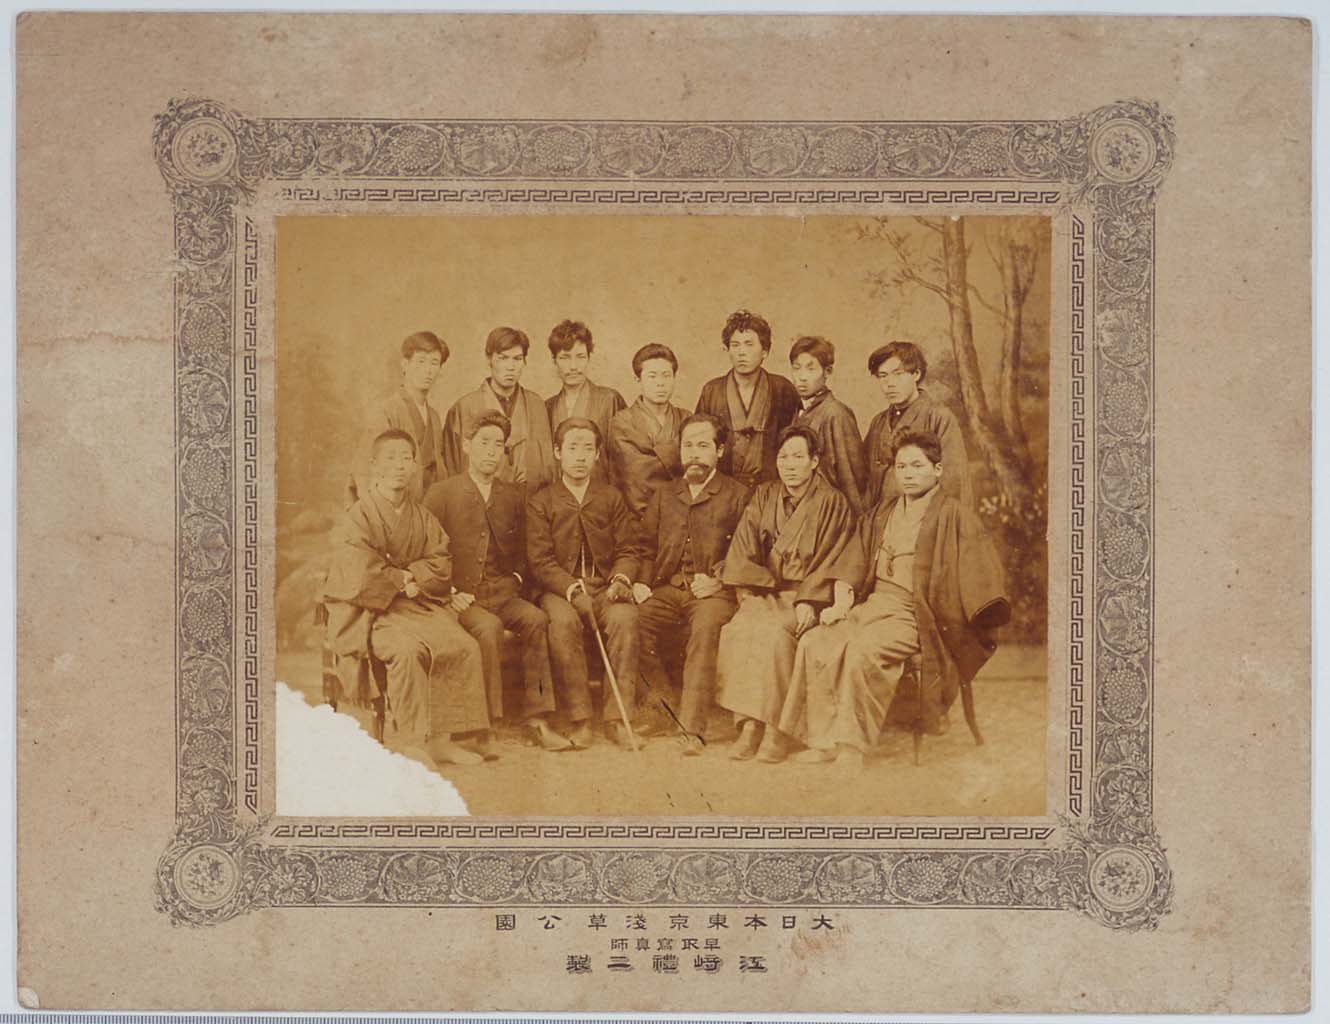 Photograph taken in Tokyo of the Sandai Jiken Kenpaku (November 1887), an early people's rights movement that advocated lower taxes, freedom of speech and assembly, and the rectification of diplomatic failures(larger)